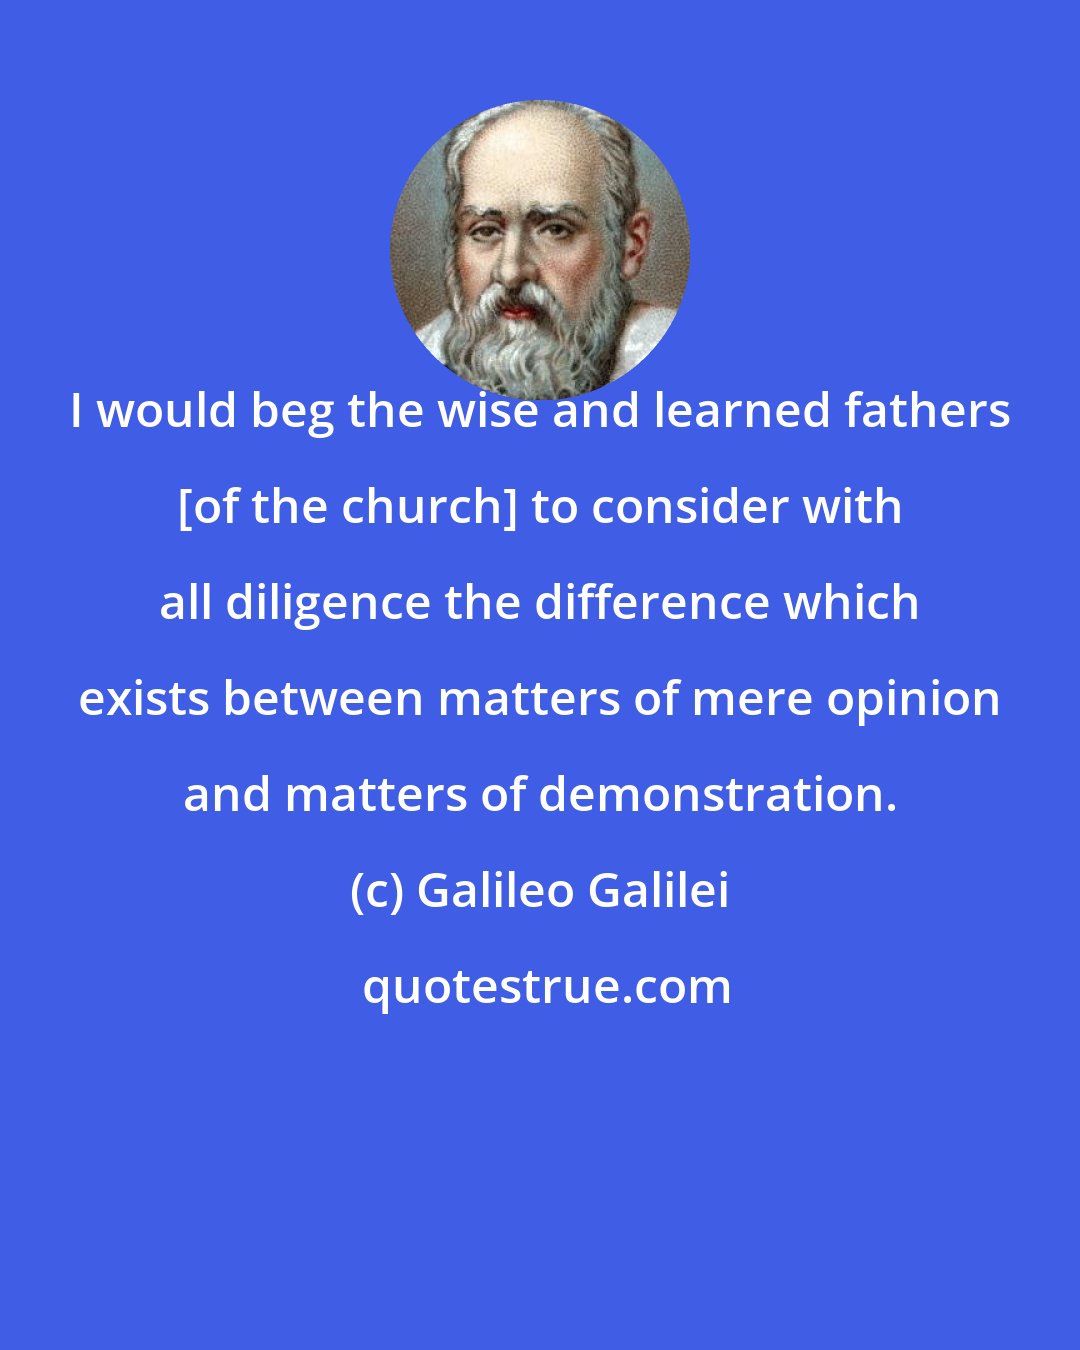 Galileo Galilei: I would beg the wise and learned fathers [of the church] to consider with all diligence the difference which exists between matters of mere opinion and matters of demonstration.